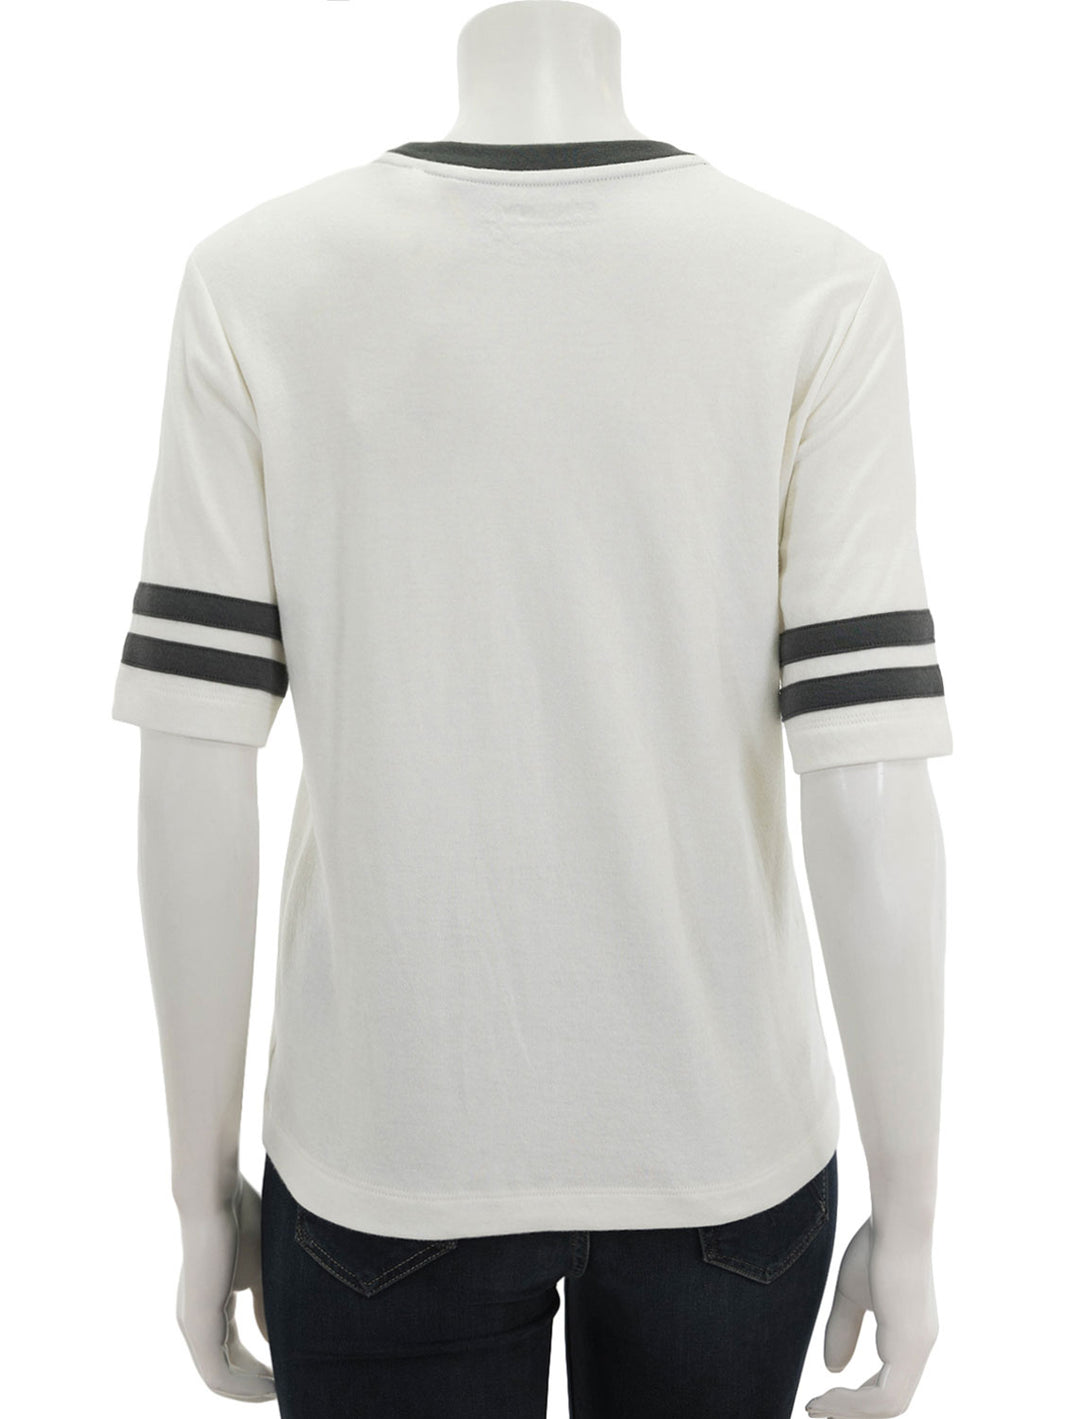 Back view of Faherty's cloud varsity tee in white.